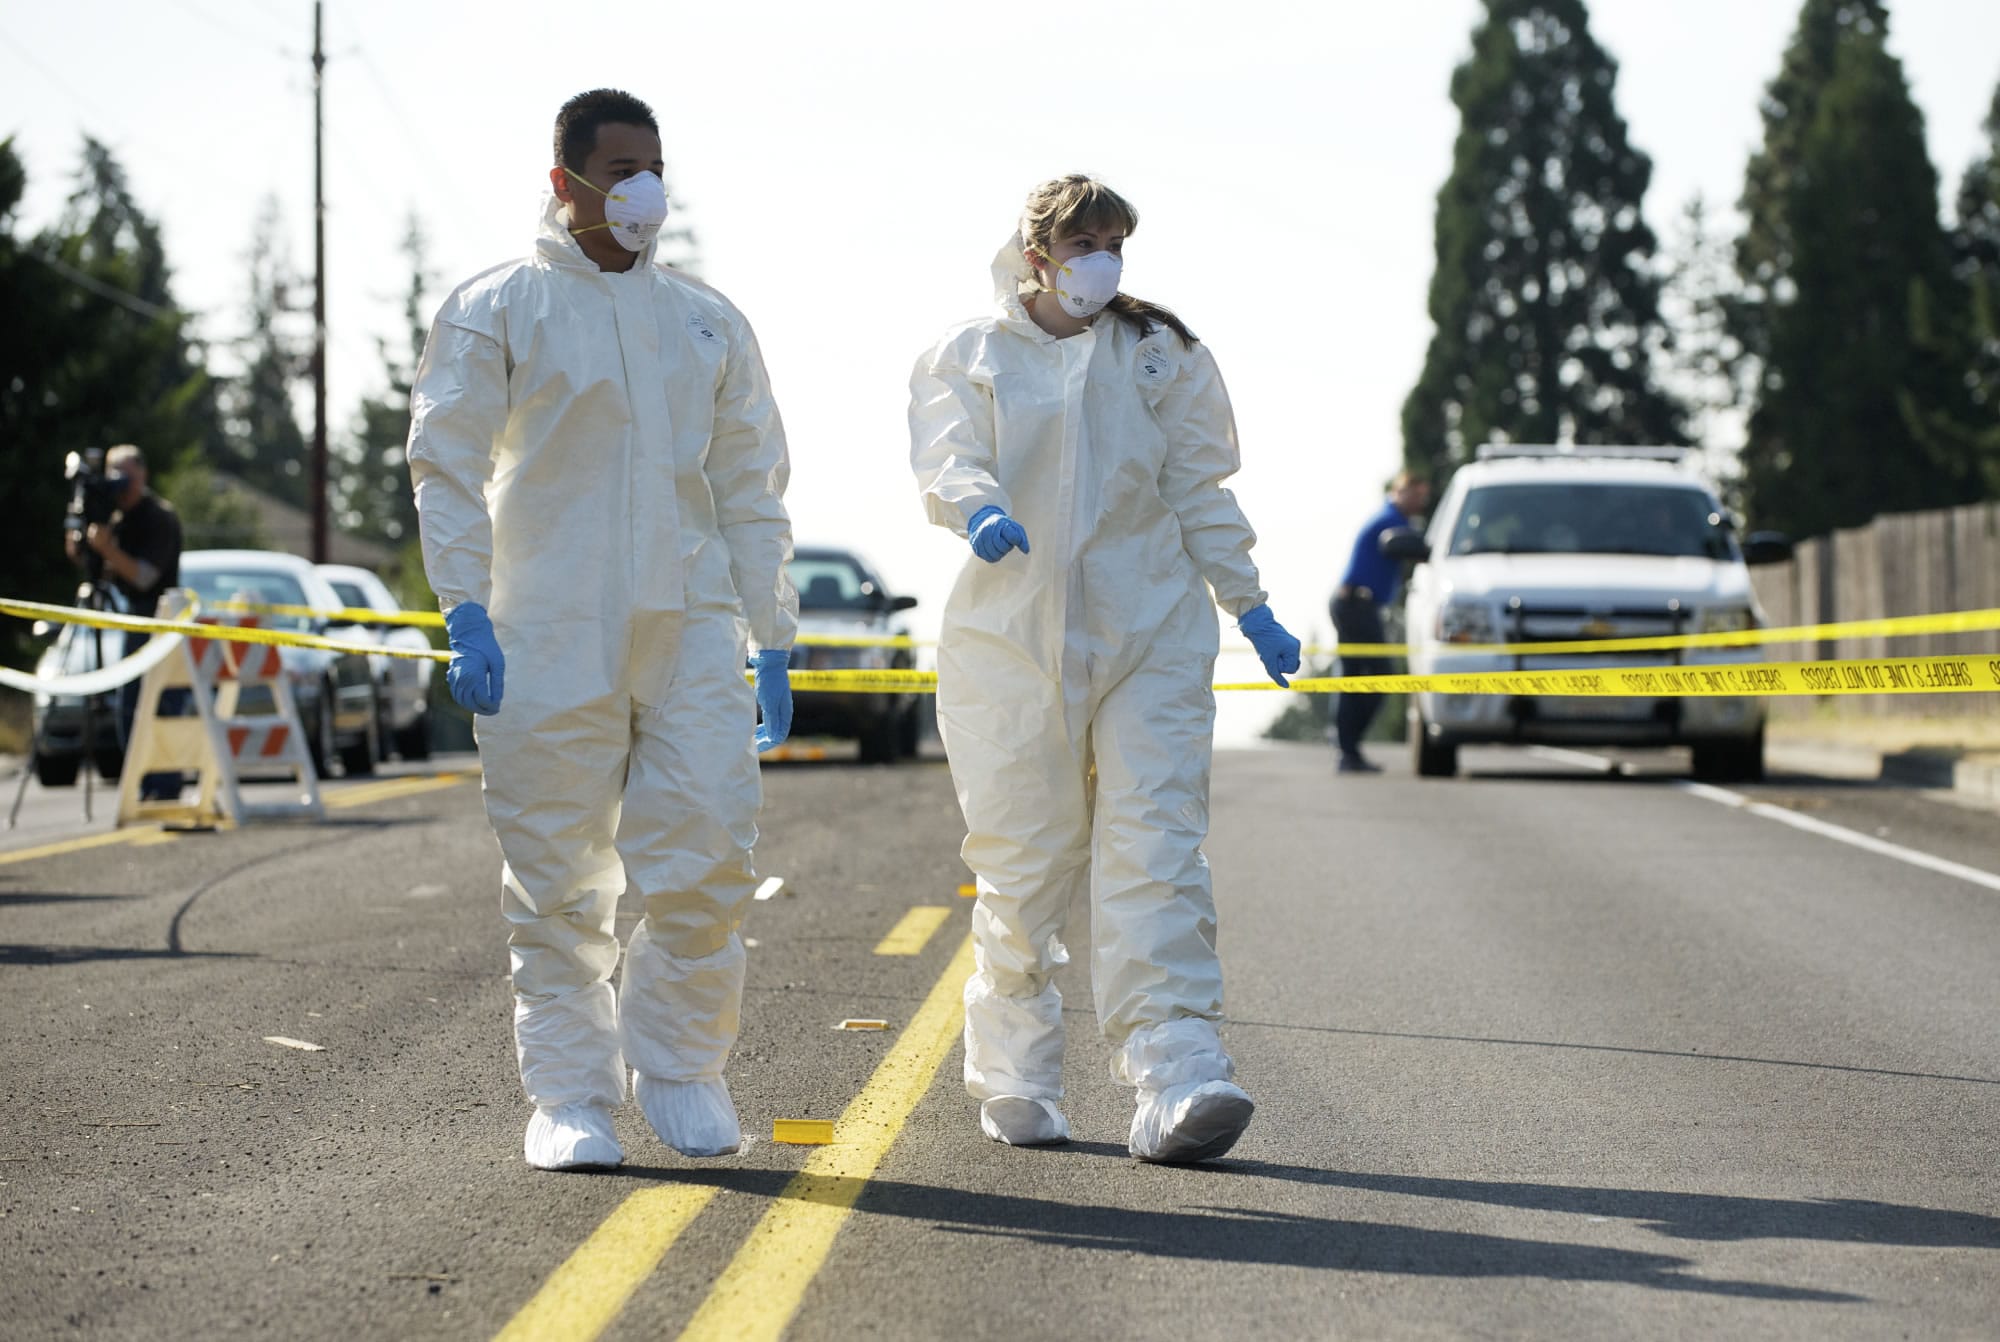 Skills Center student interns Edgar Quintero, 17, left, and Clair Becker, 18, wear protective gear to prepare to search a Dumpster for evidence at a homicide scene in Northeast Hazel Dell on Monday.